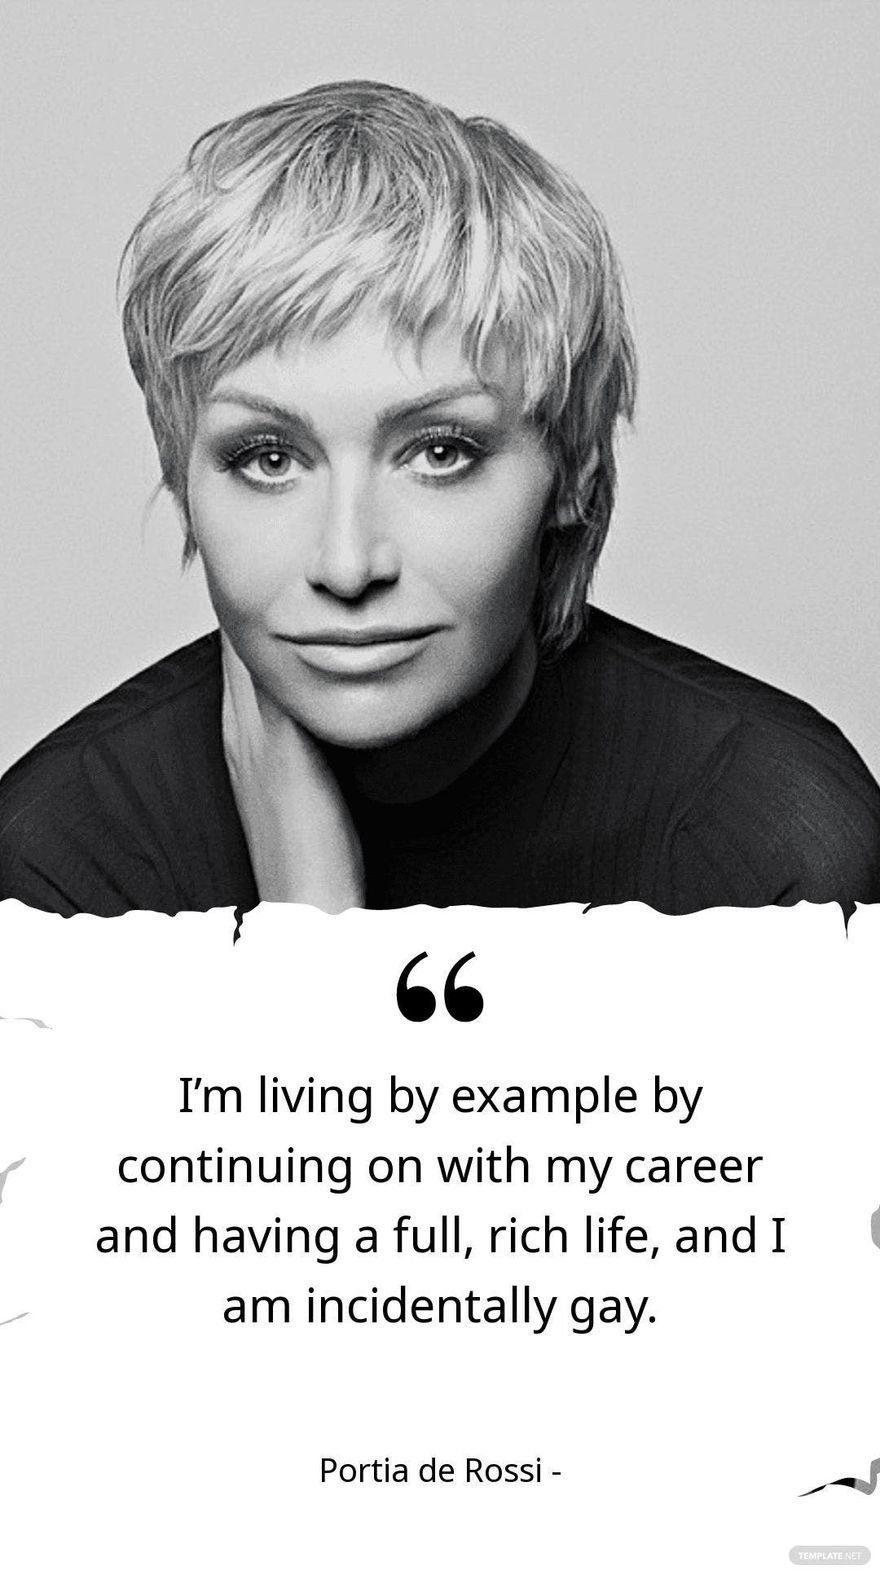 Portia de Rossi - I’m living by example by continuing on with my career and having a full, rich life, and I am incidentally gay.